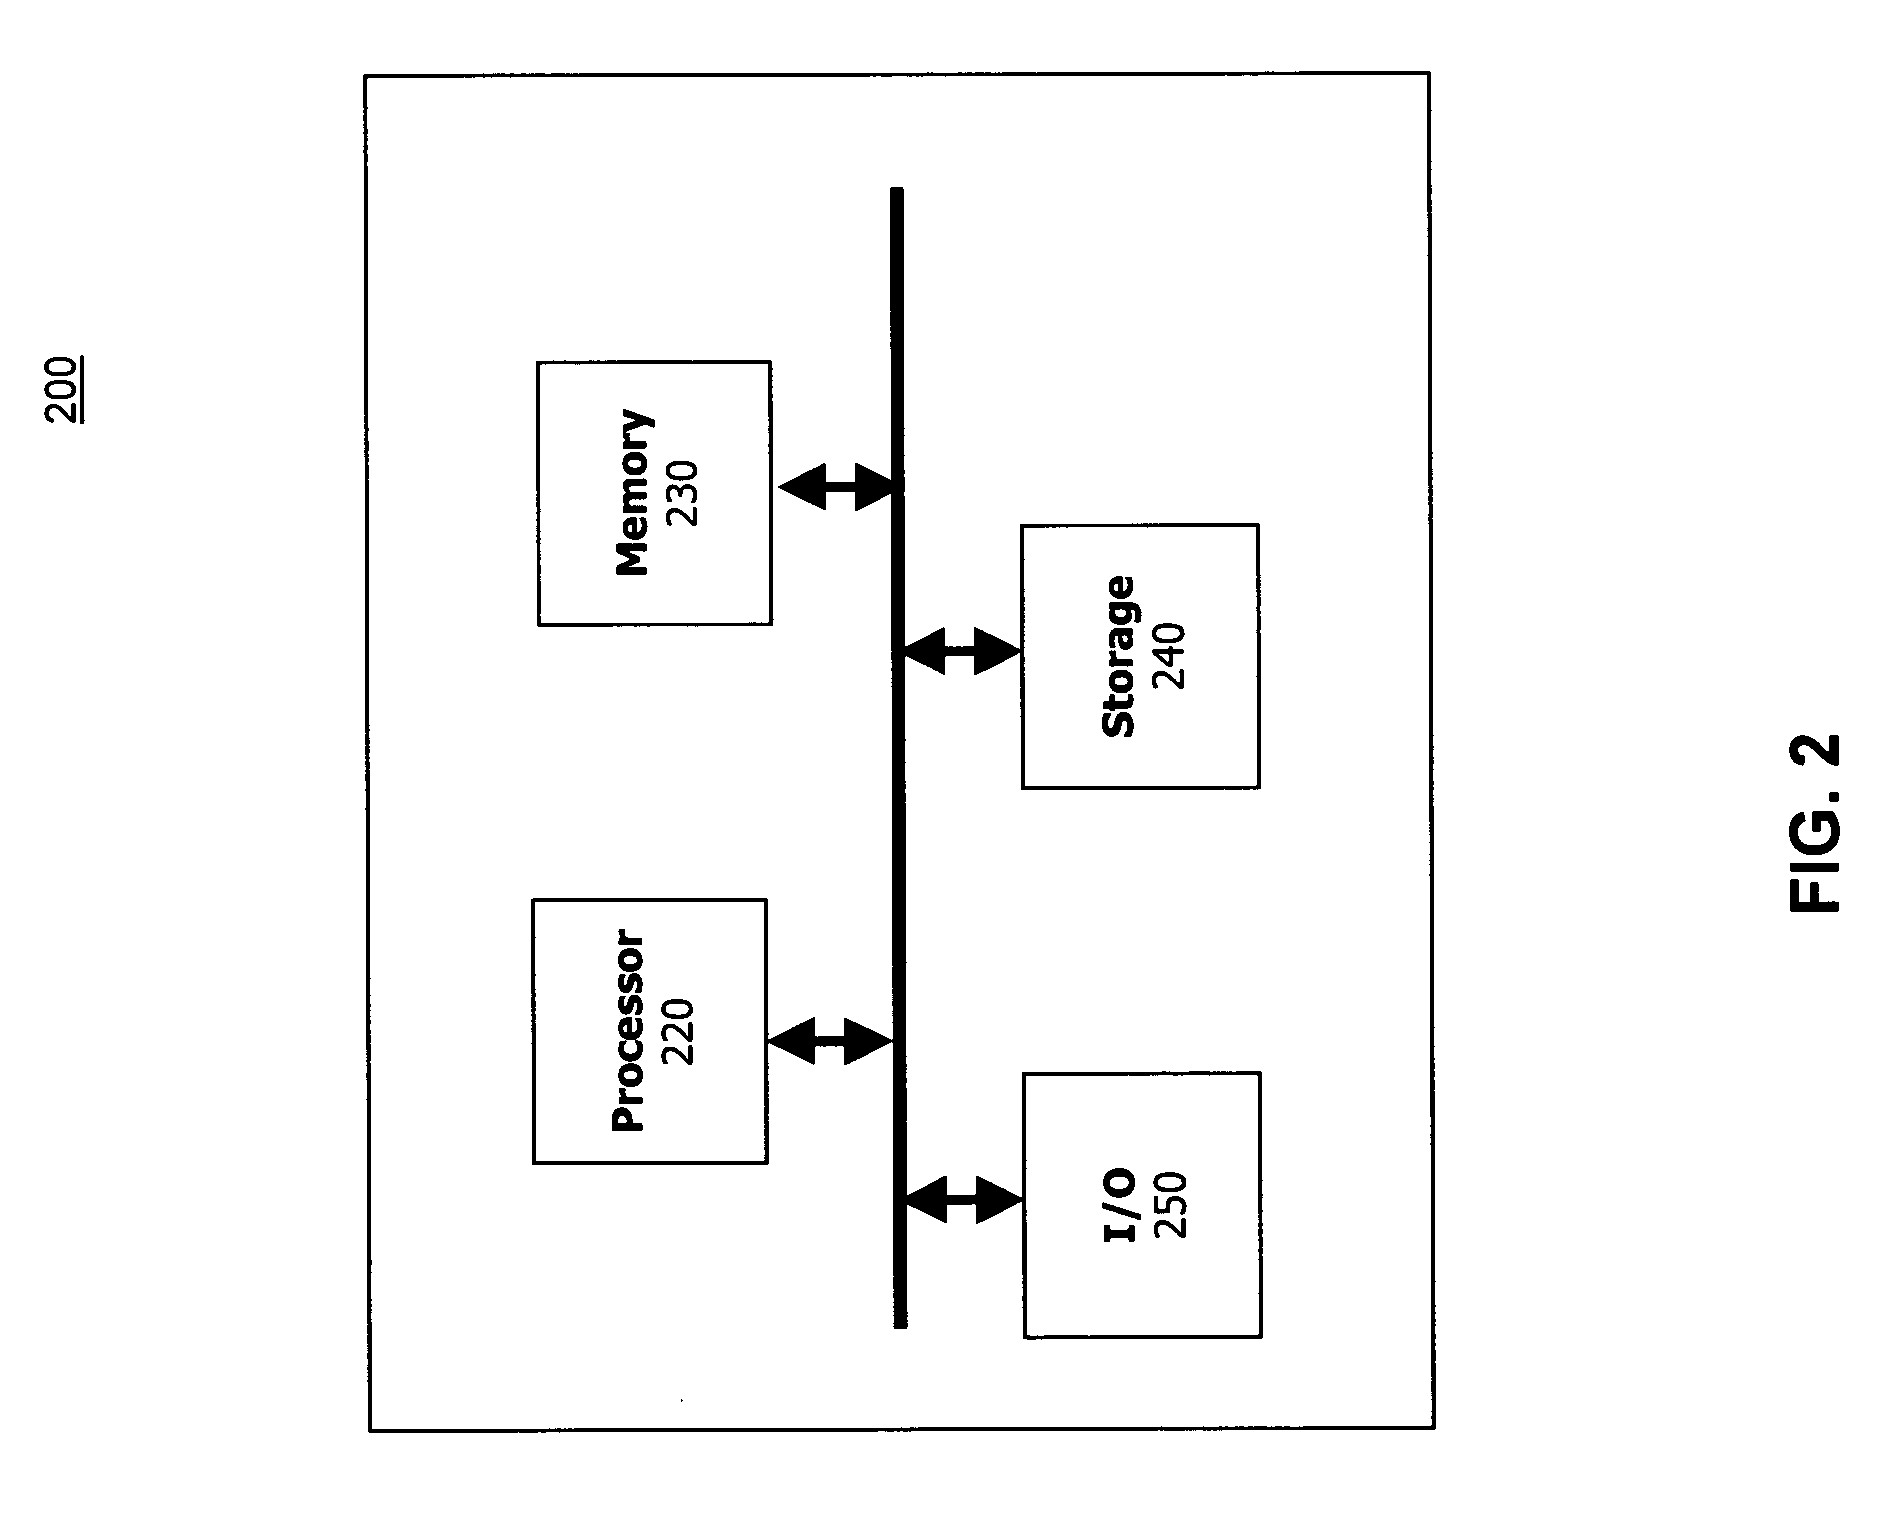 Method and system for identifying multiple questionnaire pages